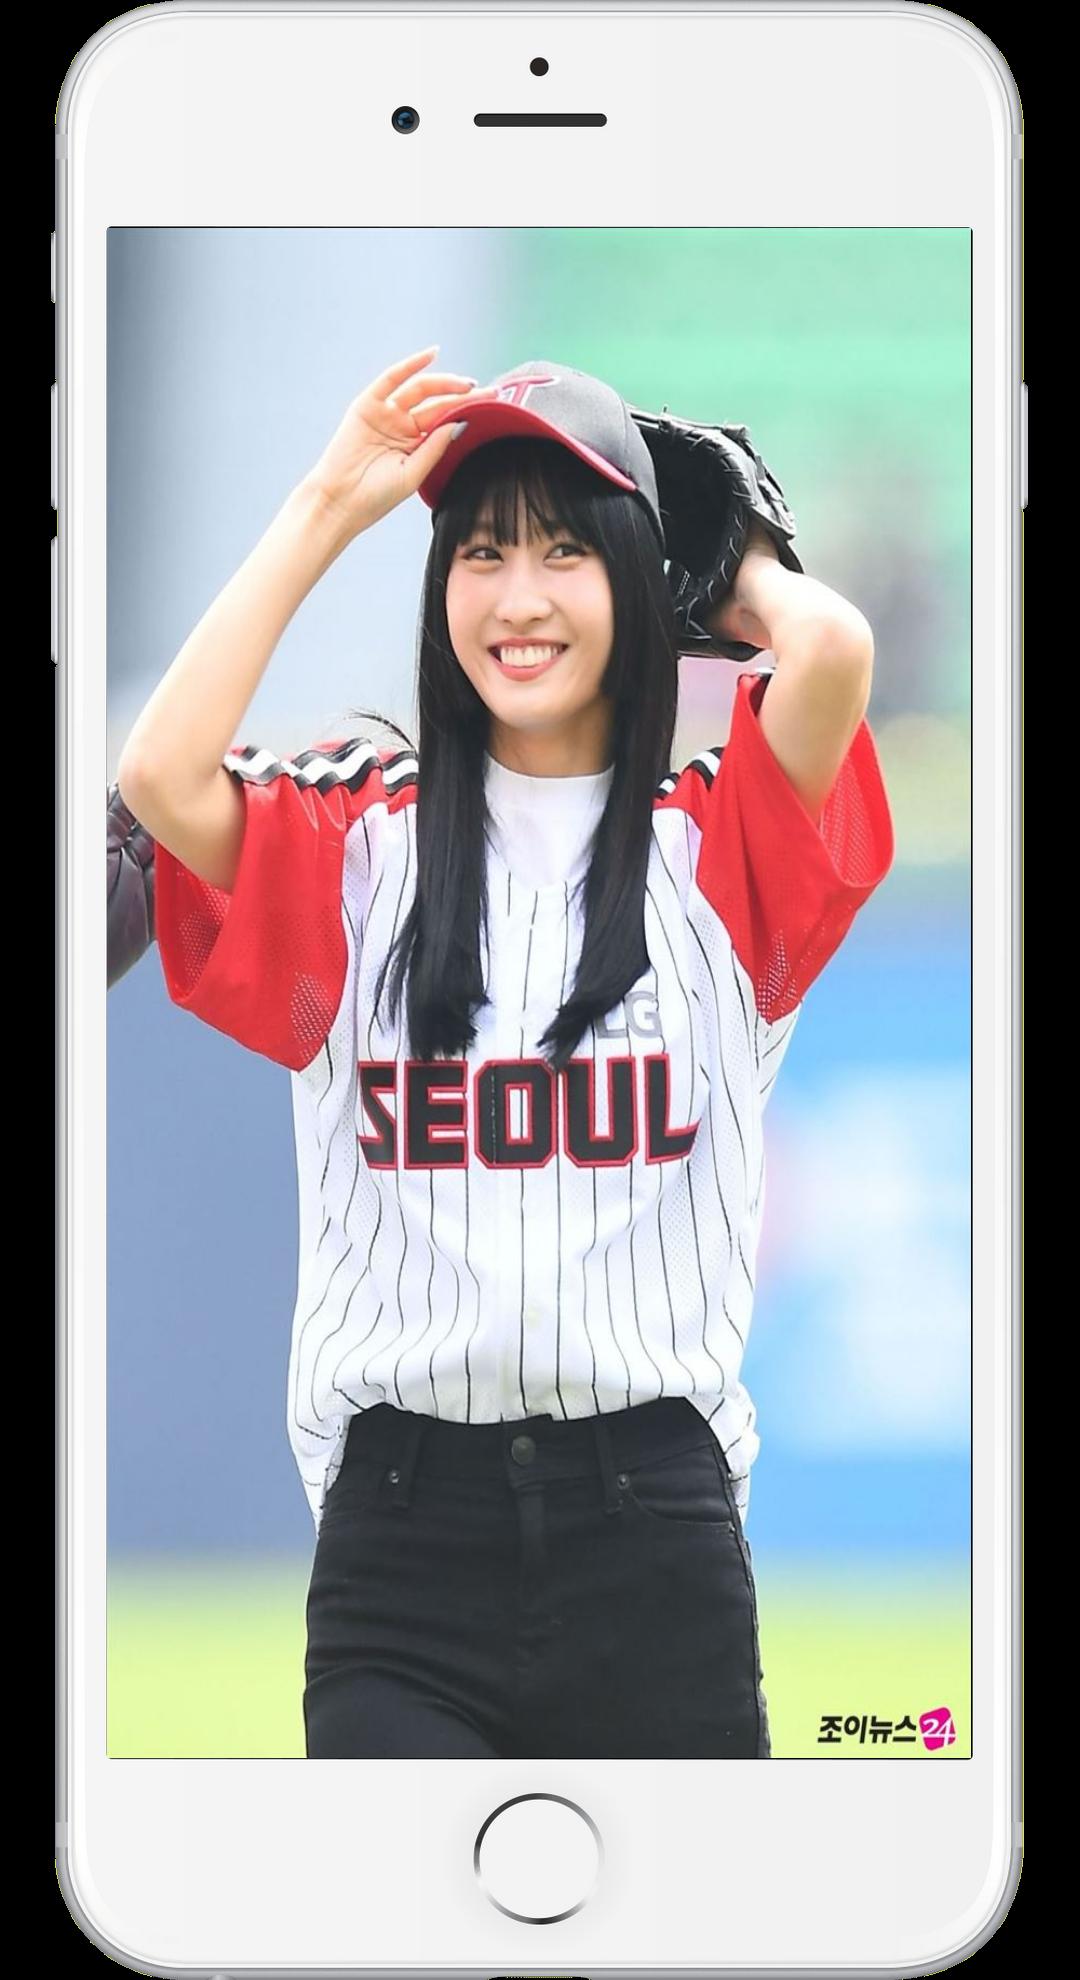 New Twice Momo Wallpaper Kpop Hd For Android Apk Download